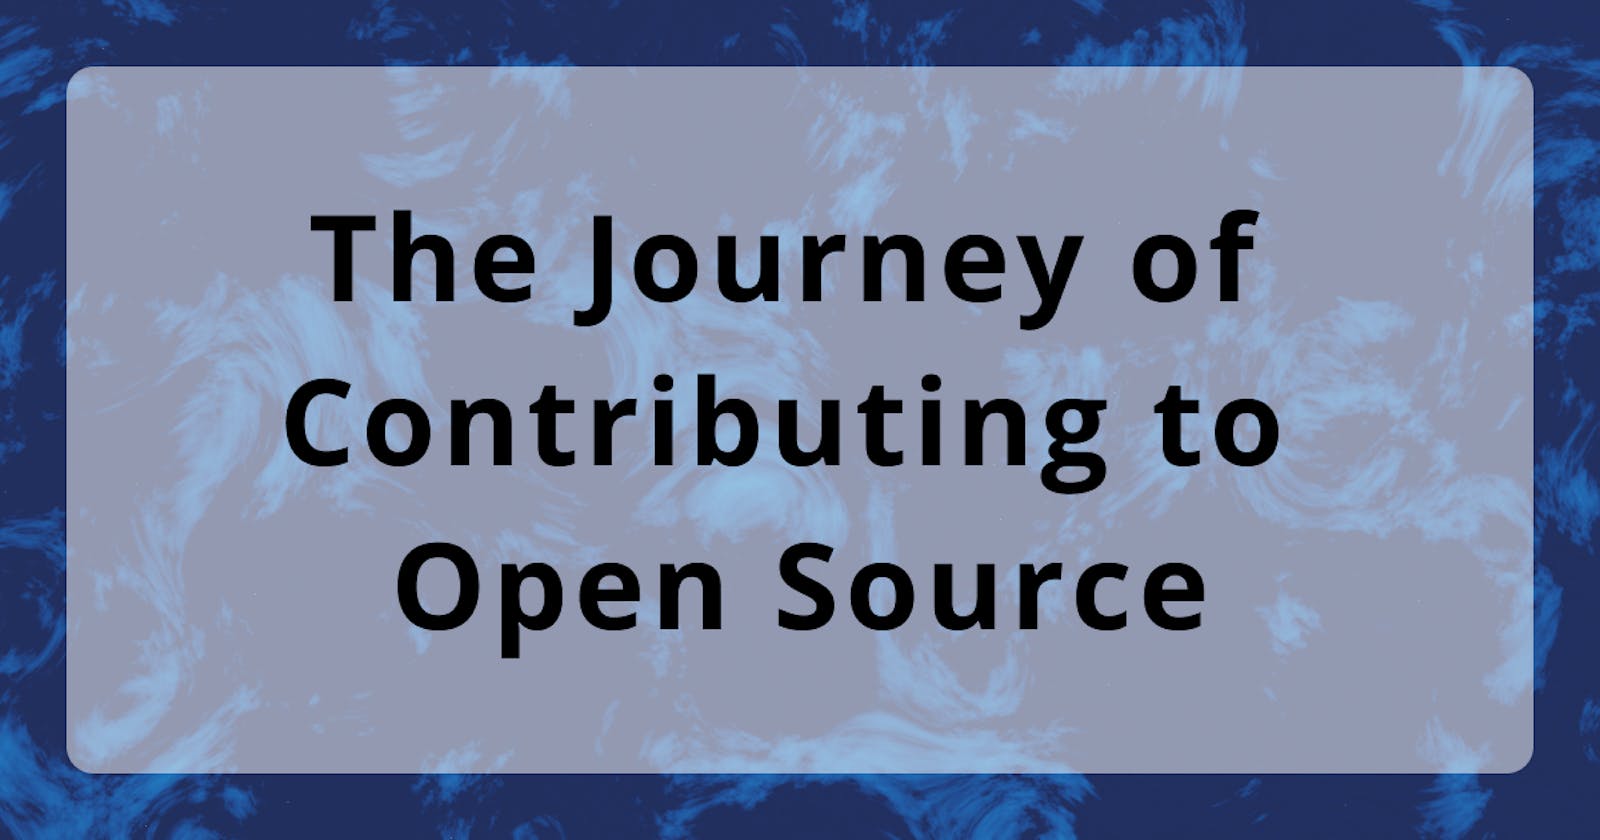 The Journey of Contributing to Open Source